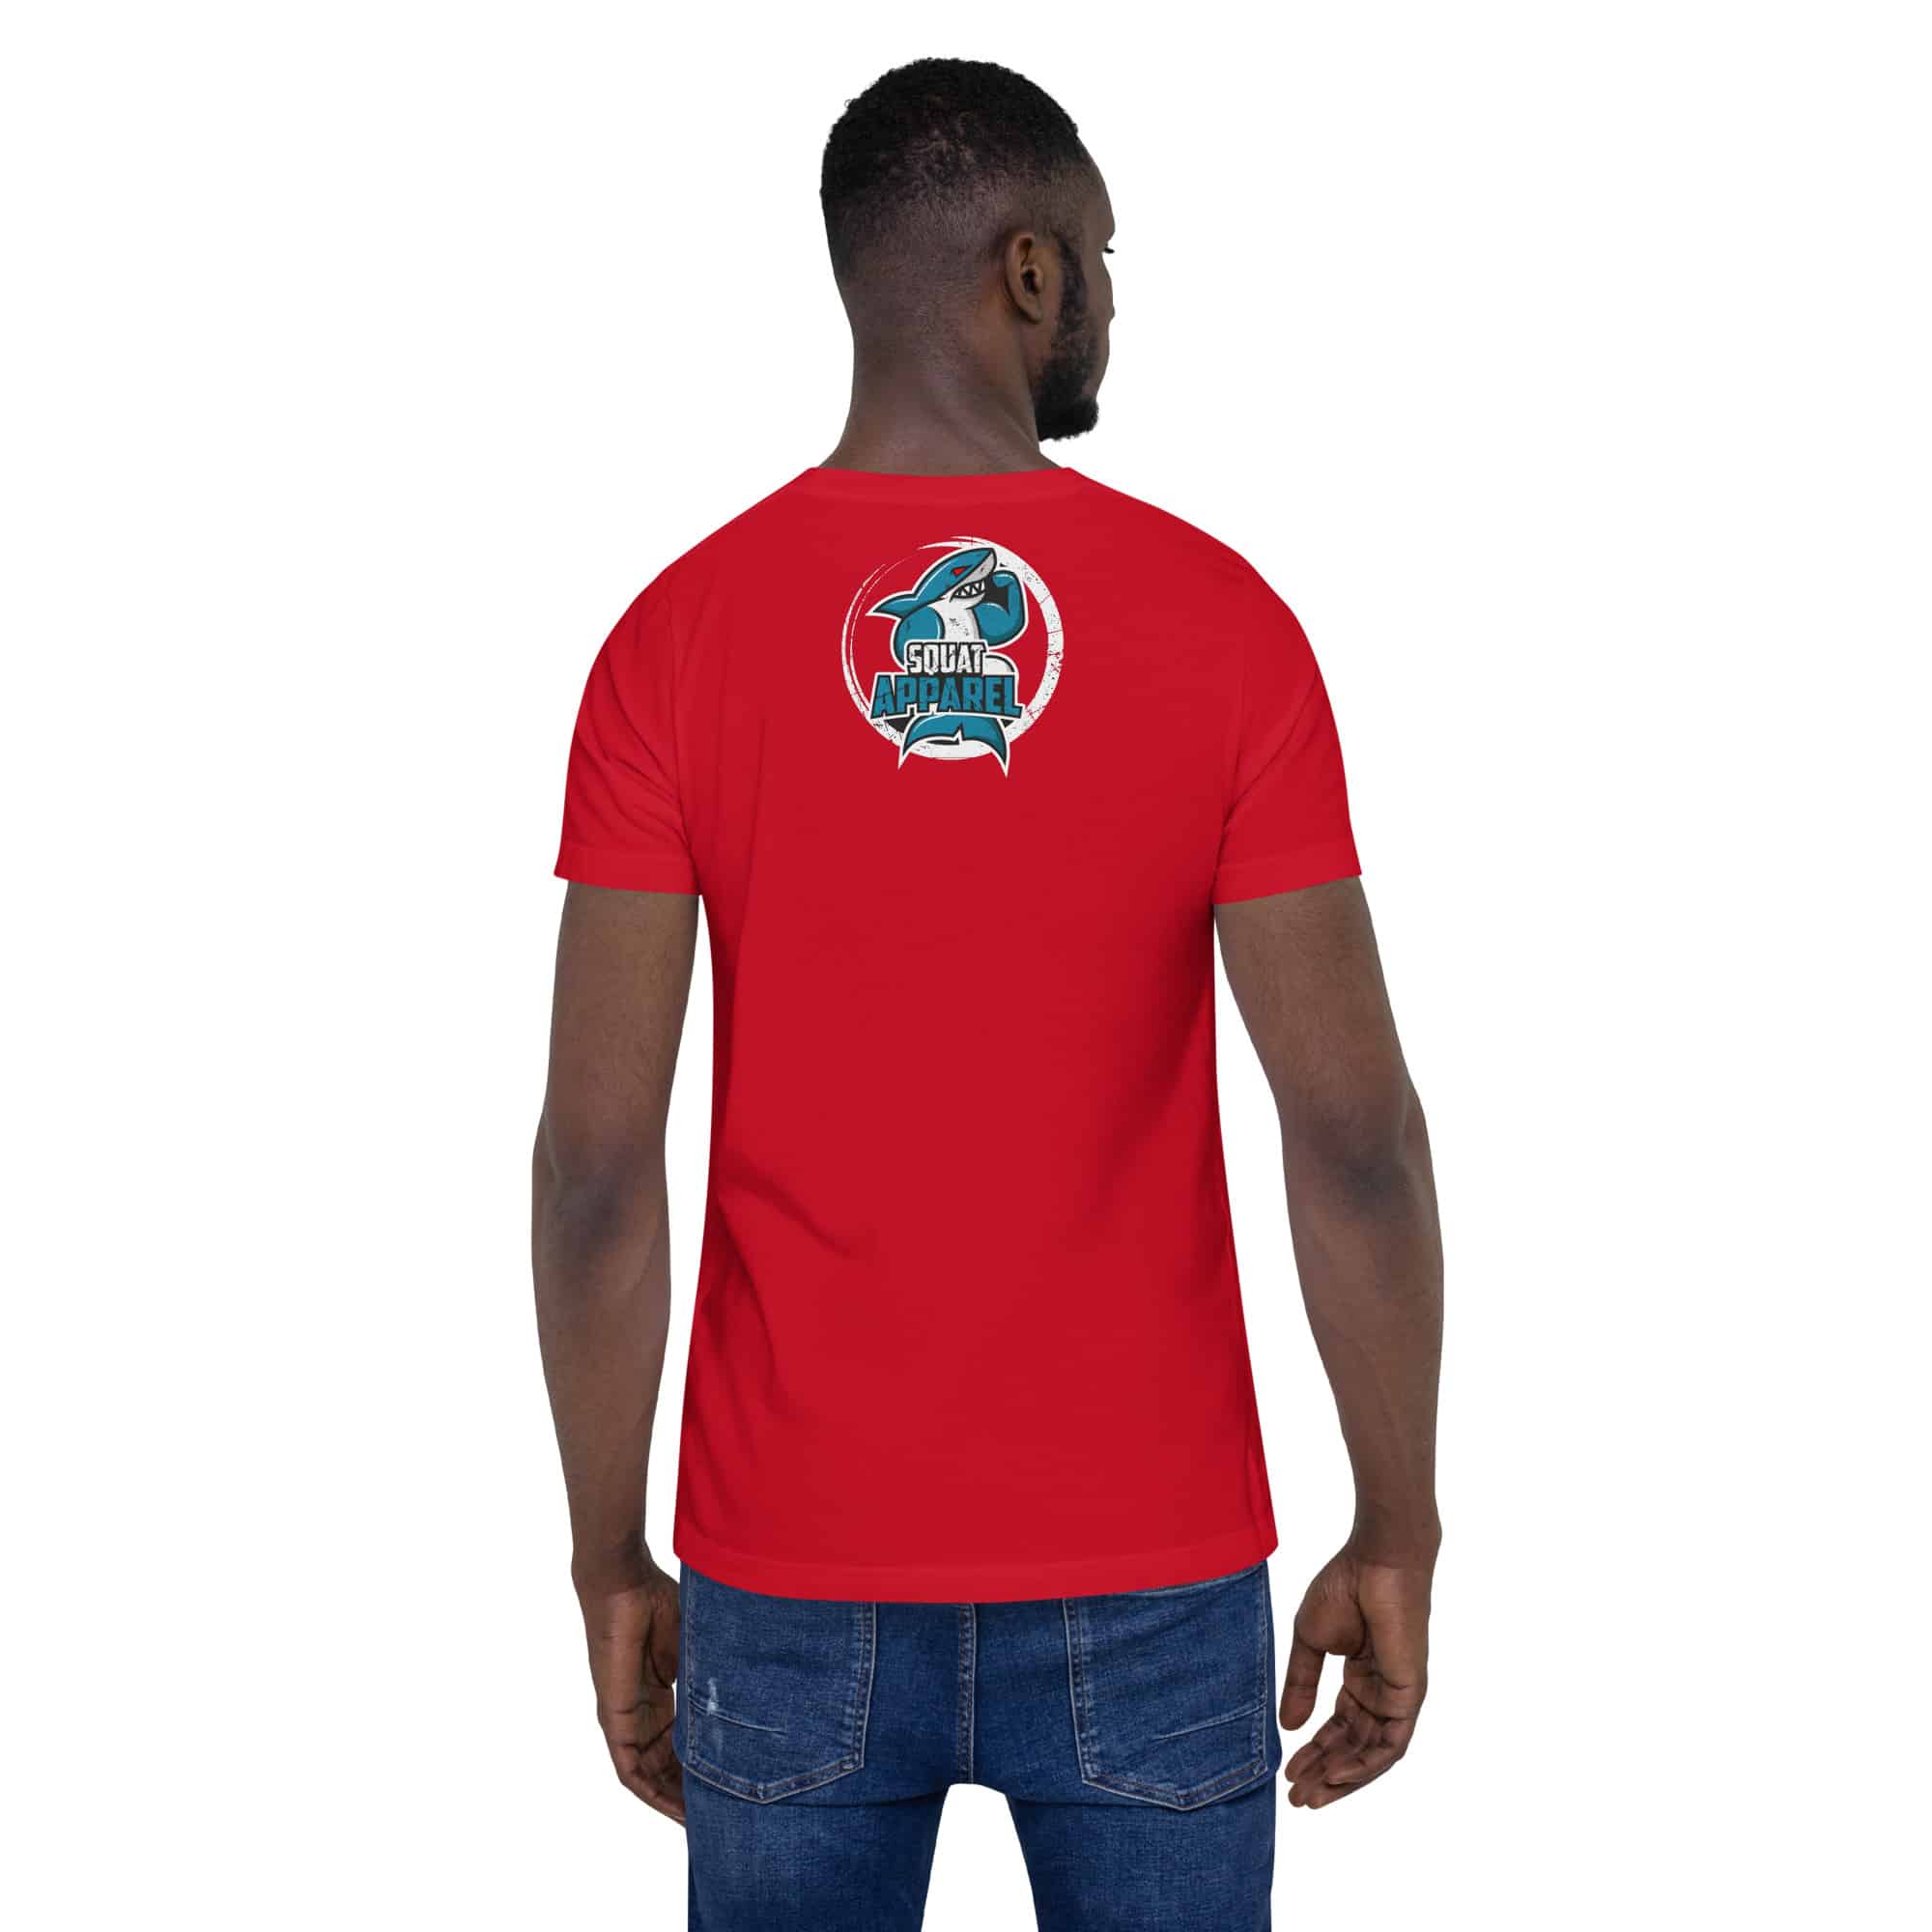 unisex staple t shirt red back 643c60a426a9f